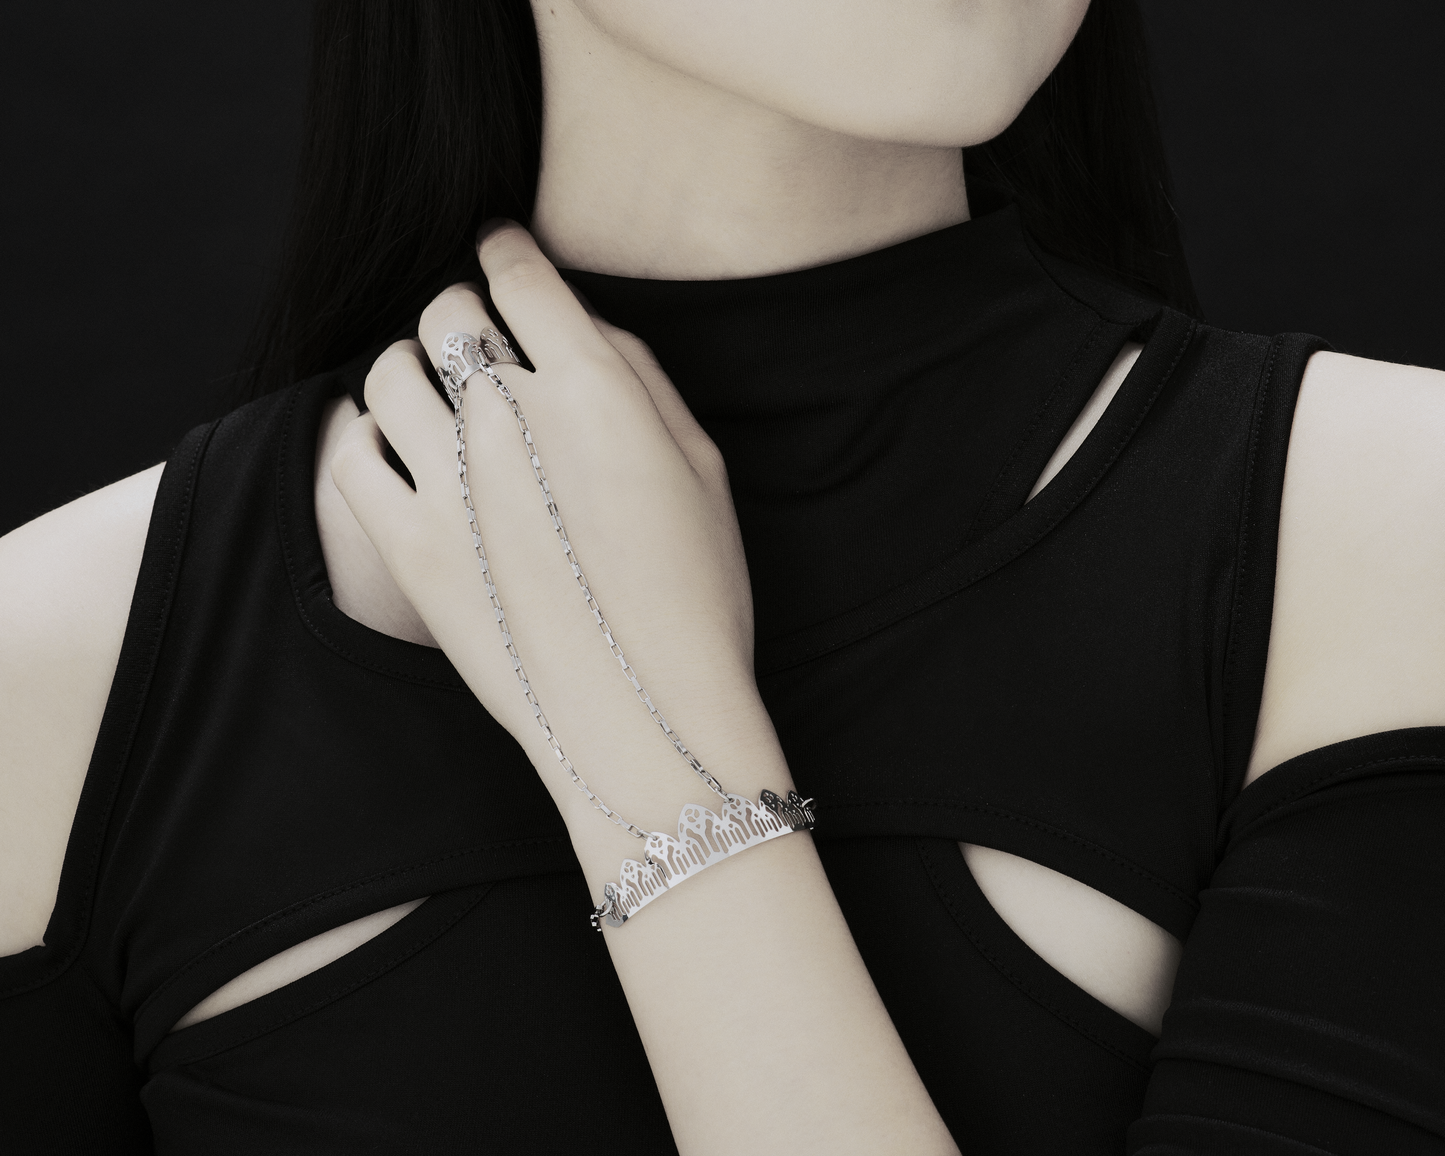 Discover Myril Jewels' exquisite craftsmanship with this hand chain bracelet ring, embodying a gothic allure. The image showcases an elegant silver filigree bracelet, seamlessly transitioning into a matching ring via a delicate chain. This sophisticated piece contrasts beautifully against the model's black sleeveless top, highlighting the meticulous cut-out design that resonates with the dark-avantgarde theme.